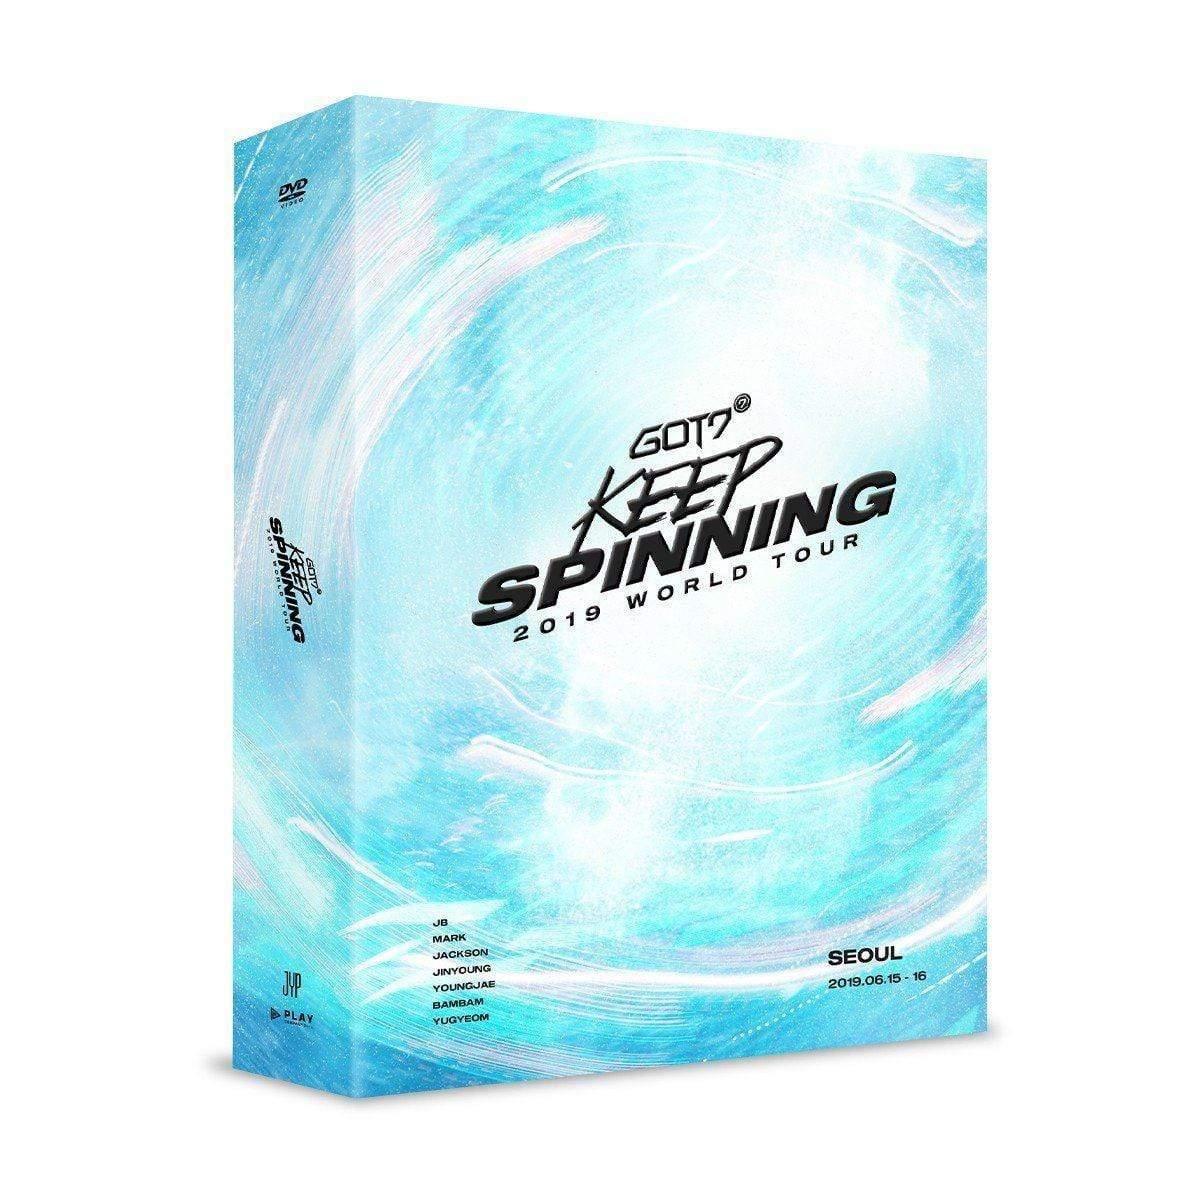 GOT7 2019 World Tour ‘Keep Spinning’ in Seoul - DVD - KAVE SQUARE